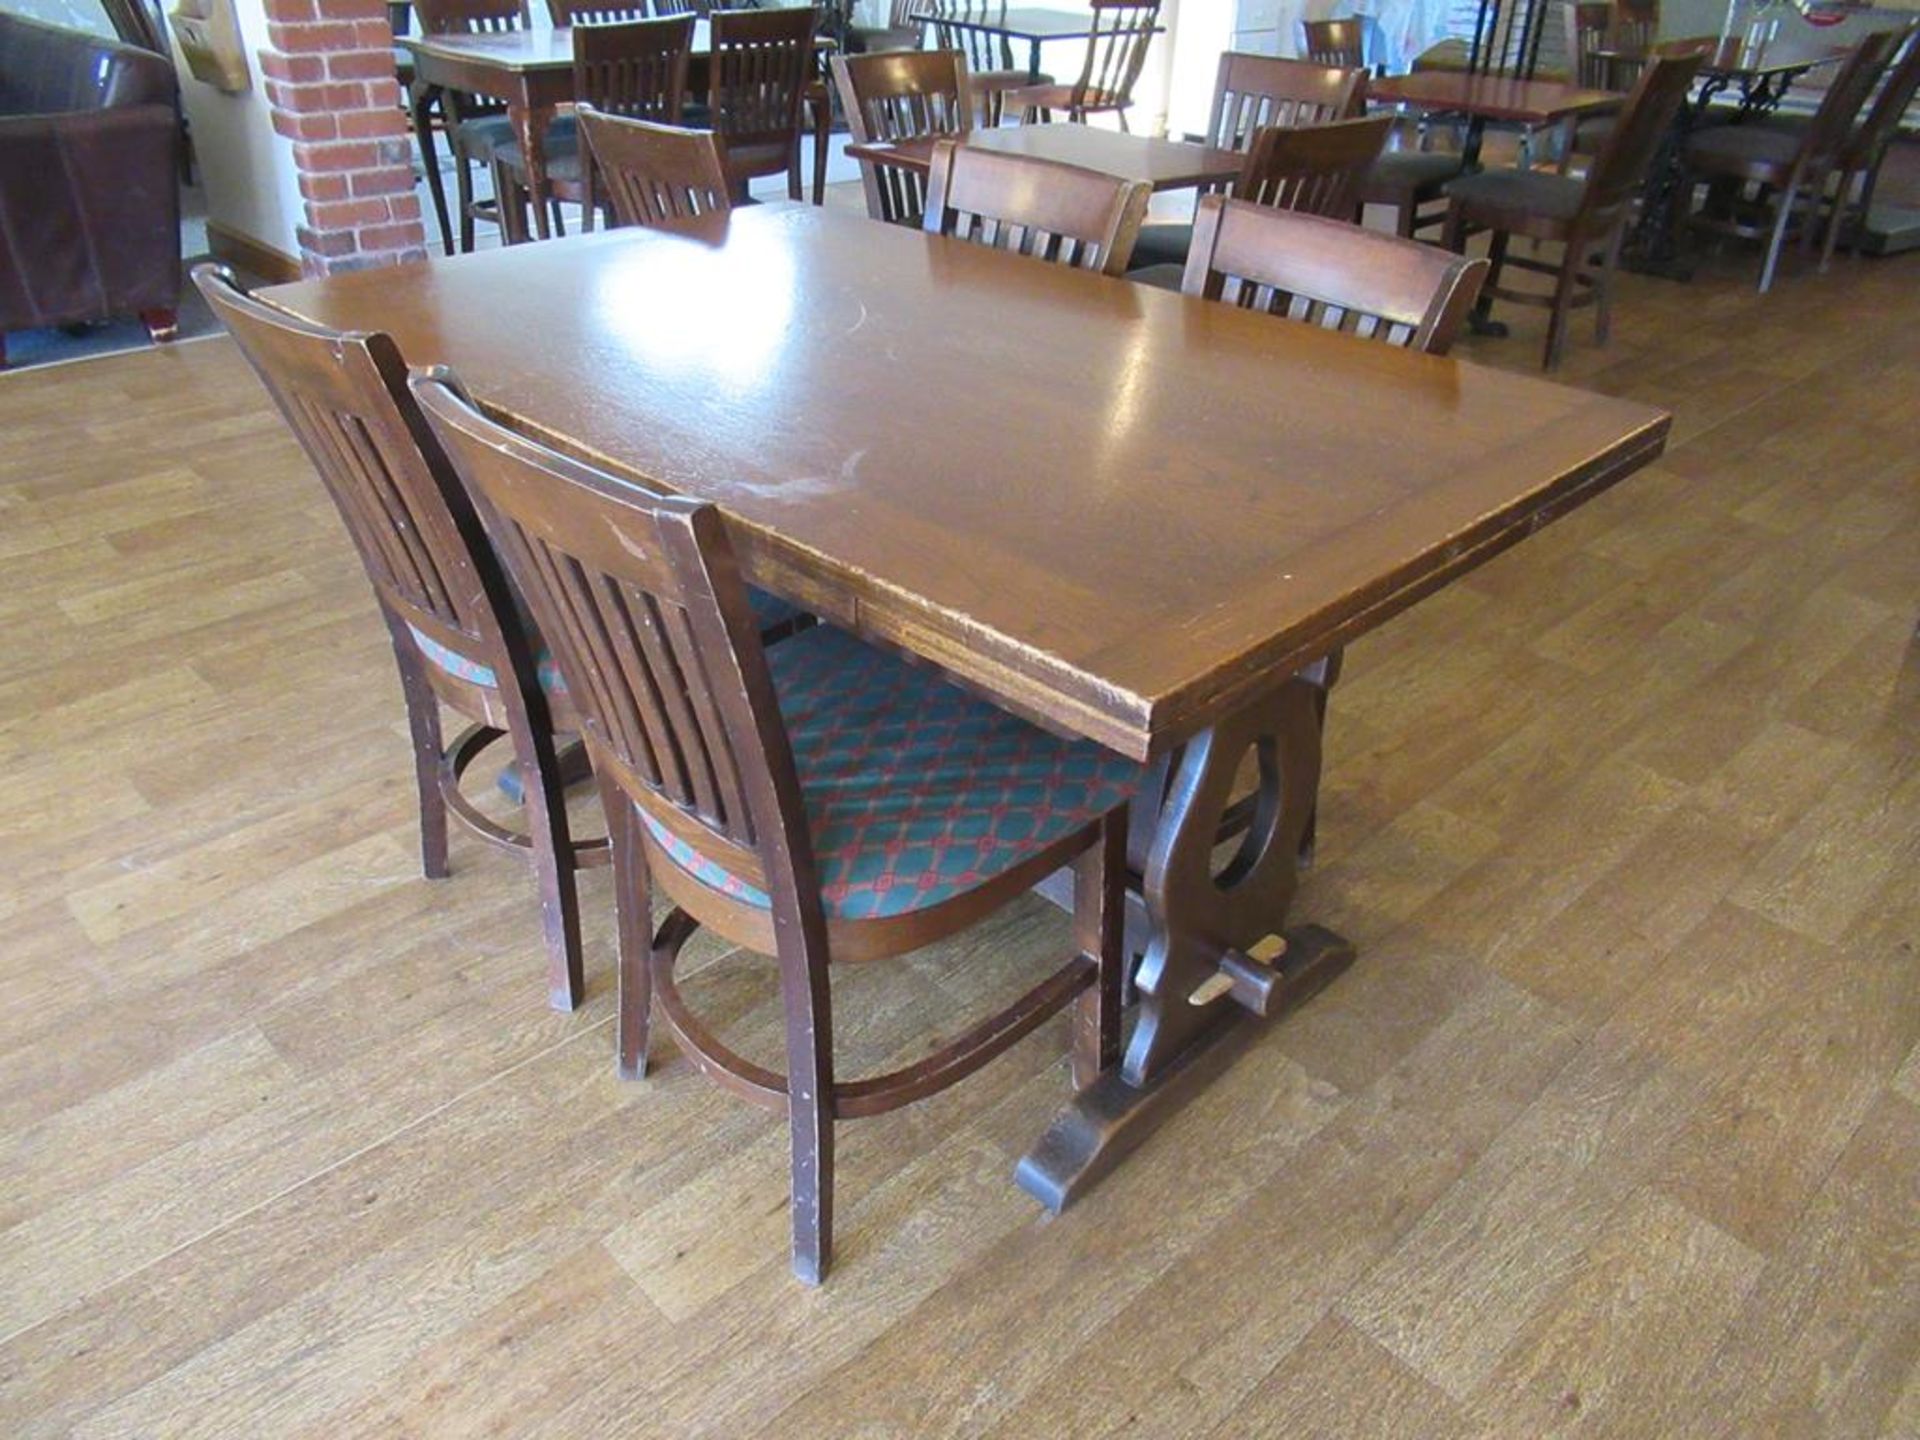 4 x Matching Wooden Framed Fabric Chairs and Dark Oak Effect Rectangular Wooden Top Dining Table